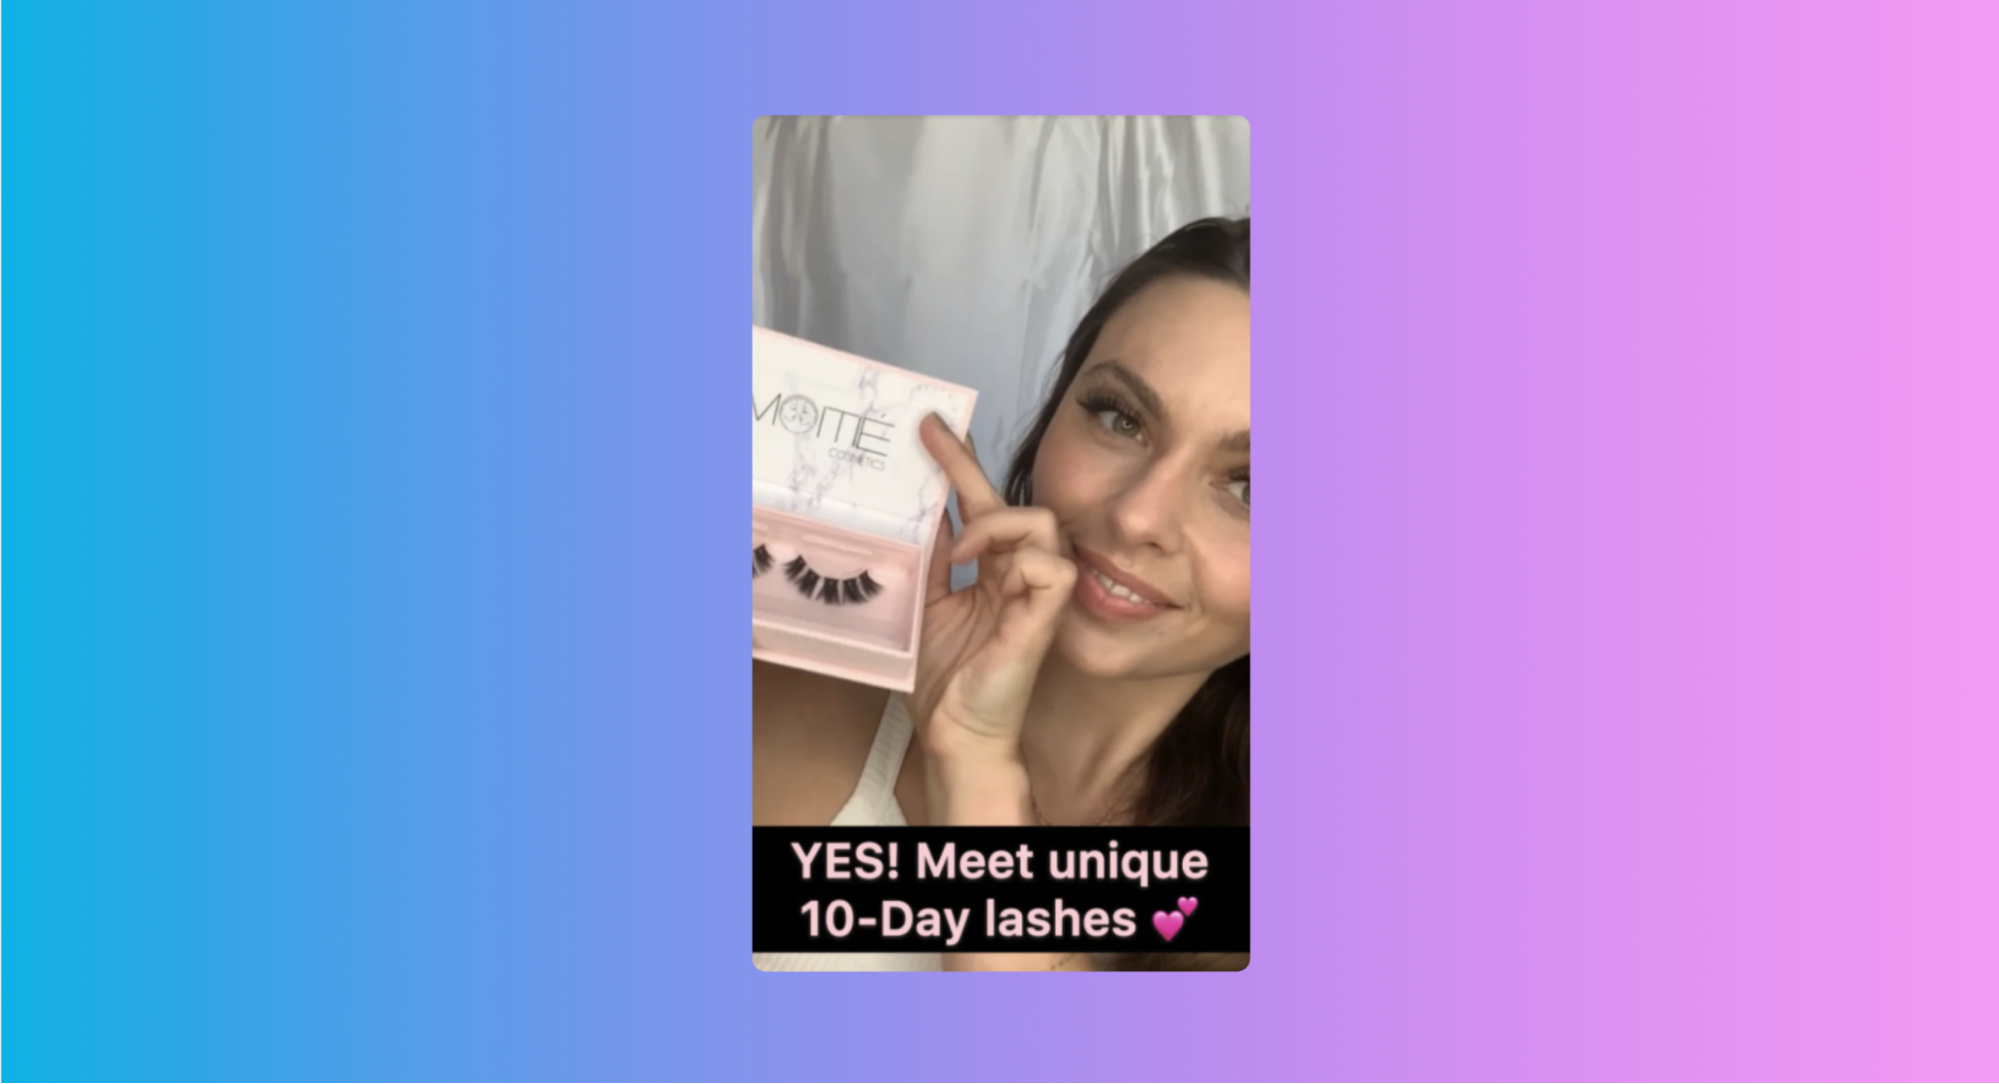 A Snapchat post by Moitie that shows a smiling model holding up a set of eyelashes with the text “YES! Meet unique 10-Day lashes.”